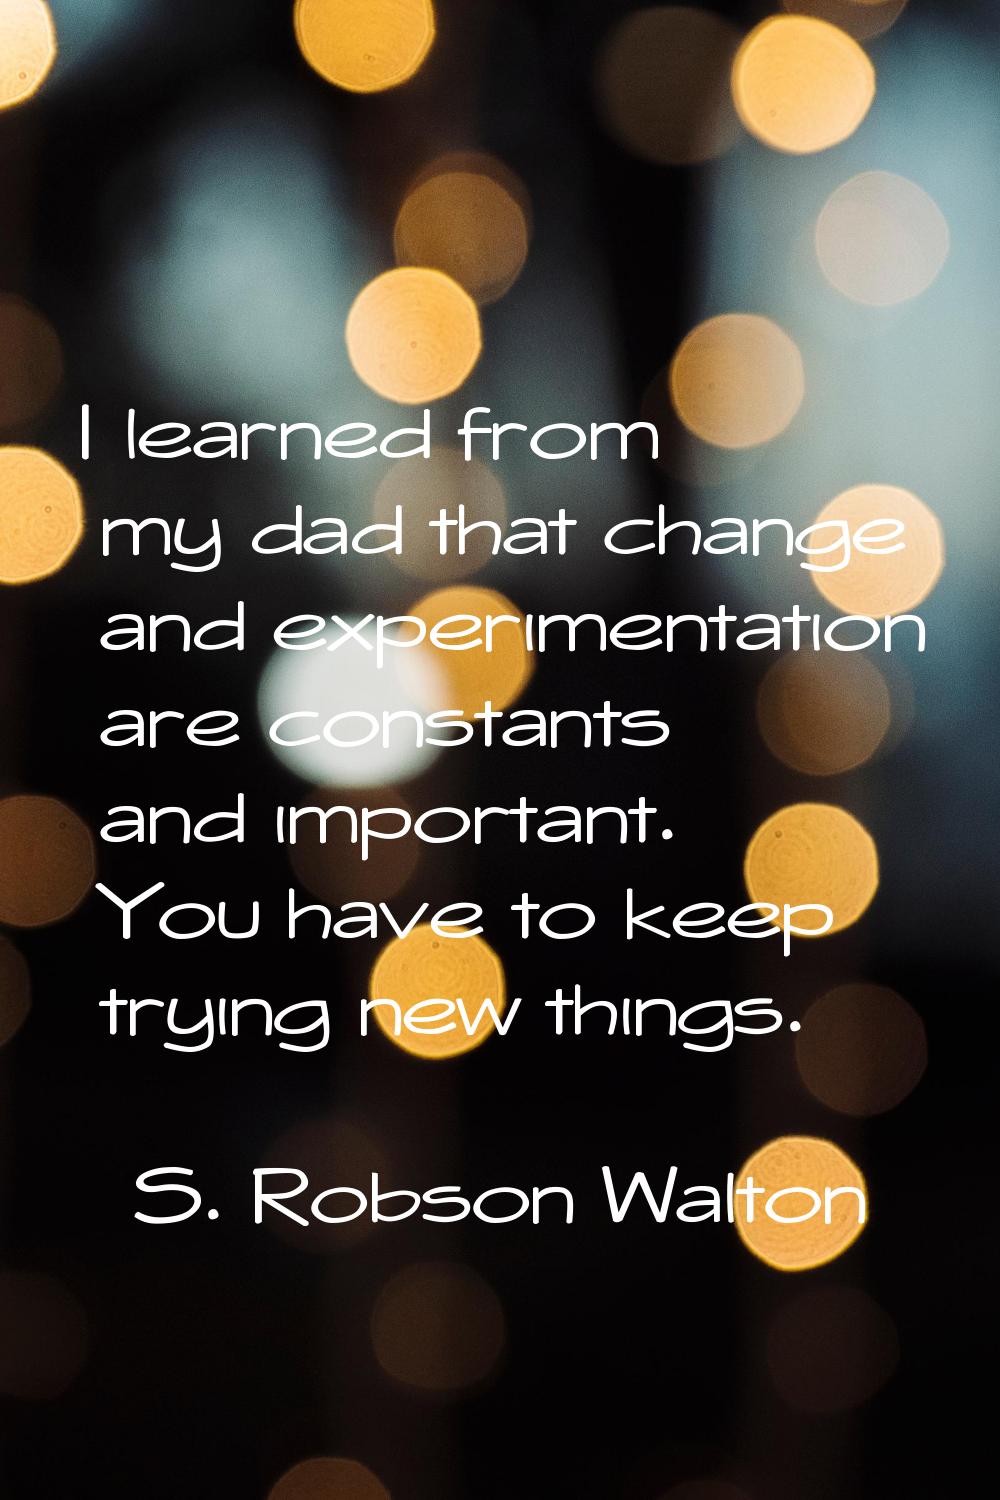 I learned from my dad that change and experimentation are constants and important. You have to keep